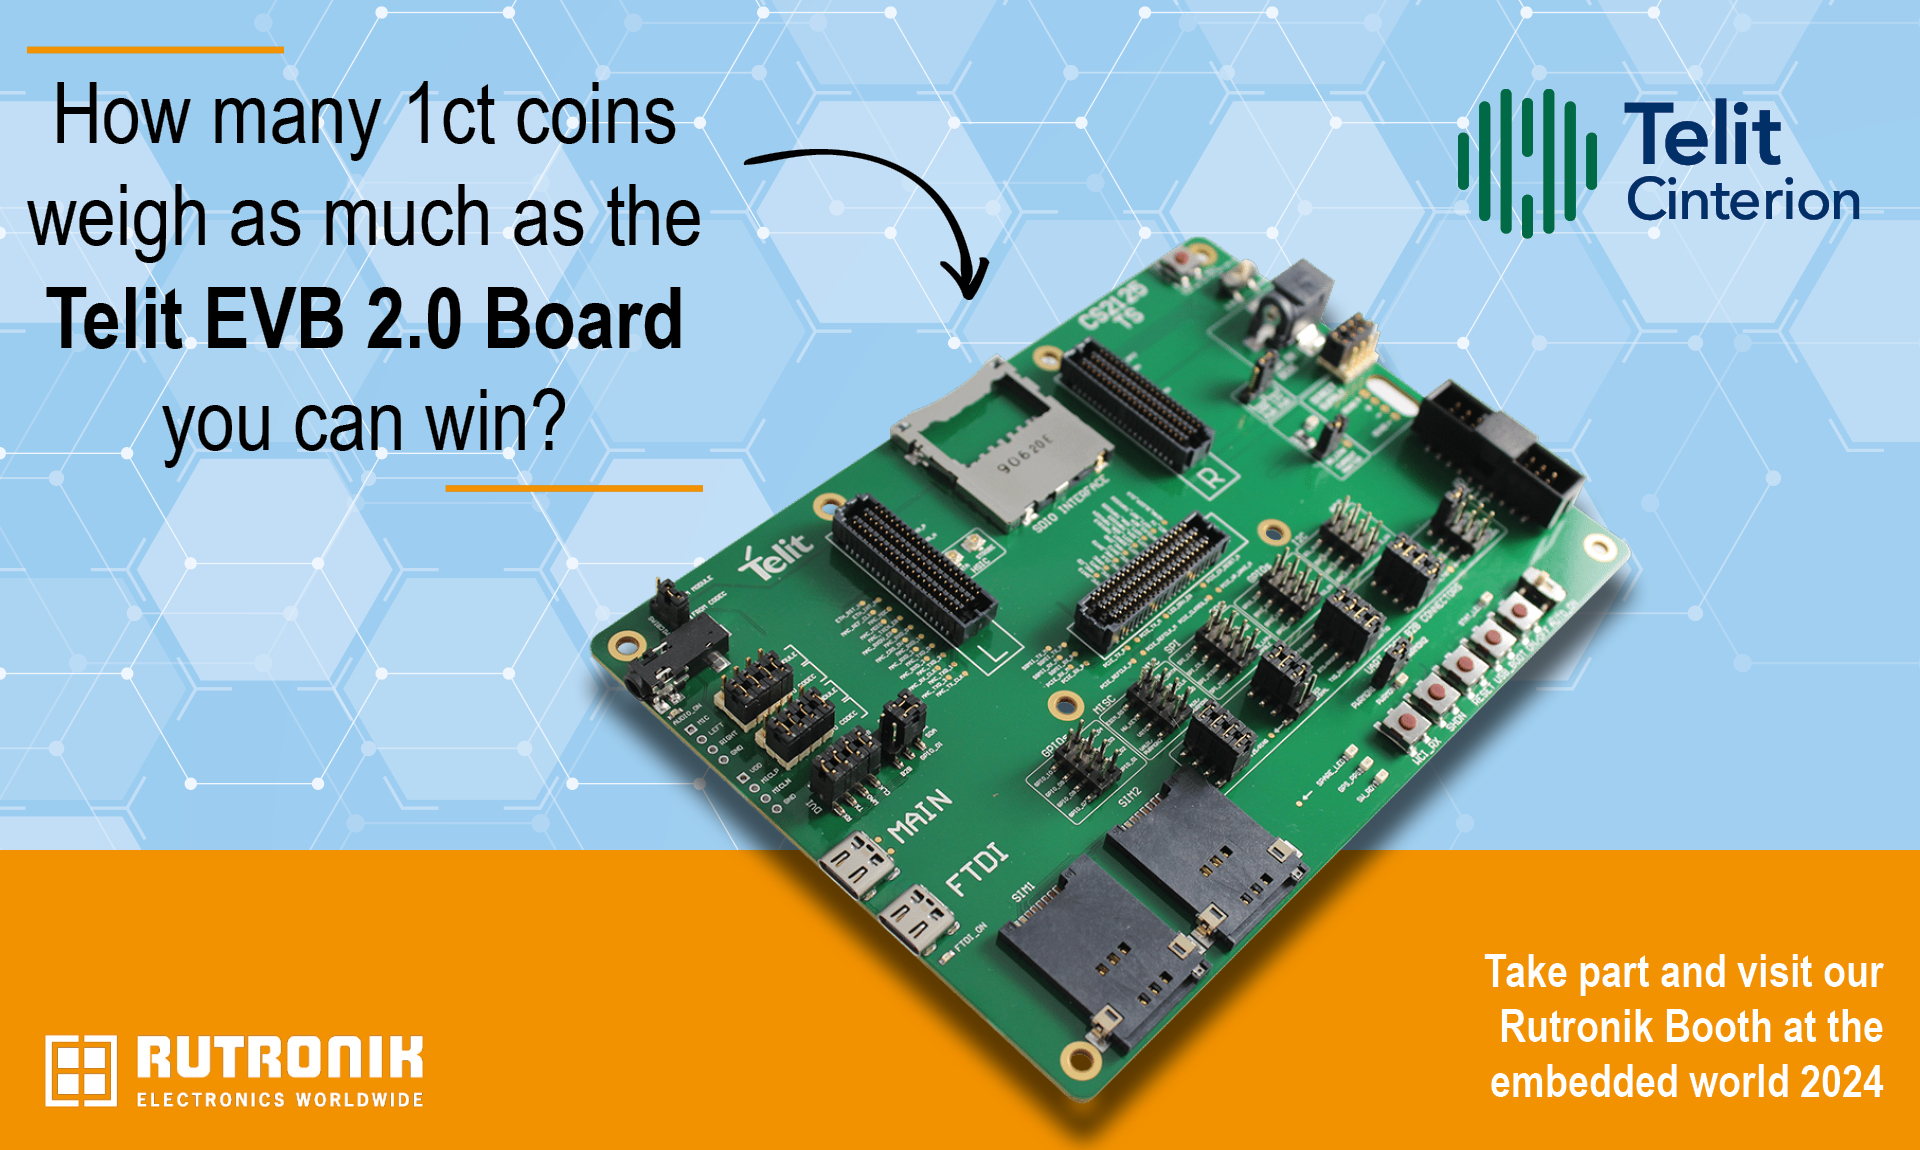 Every day the chance to win a Telit board at our Rutronik Booth at the embedded world 2024